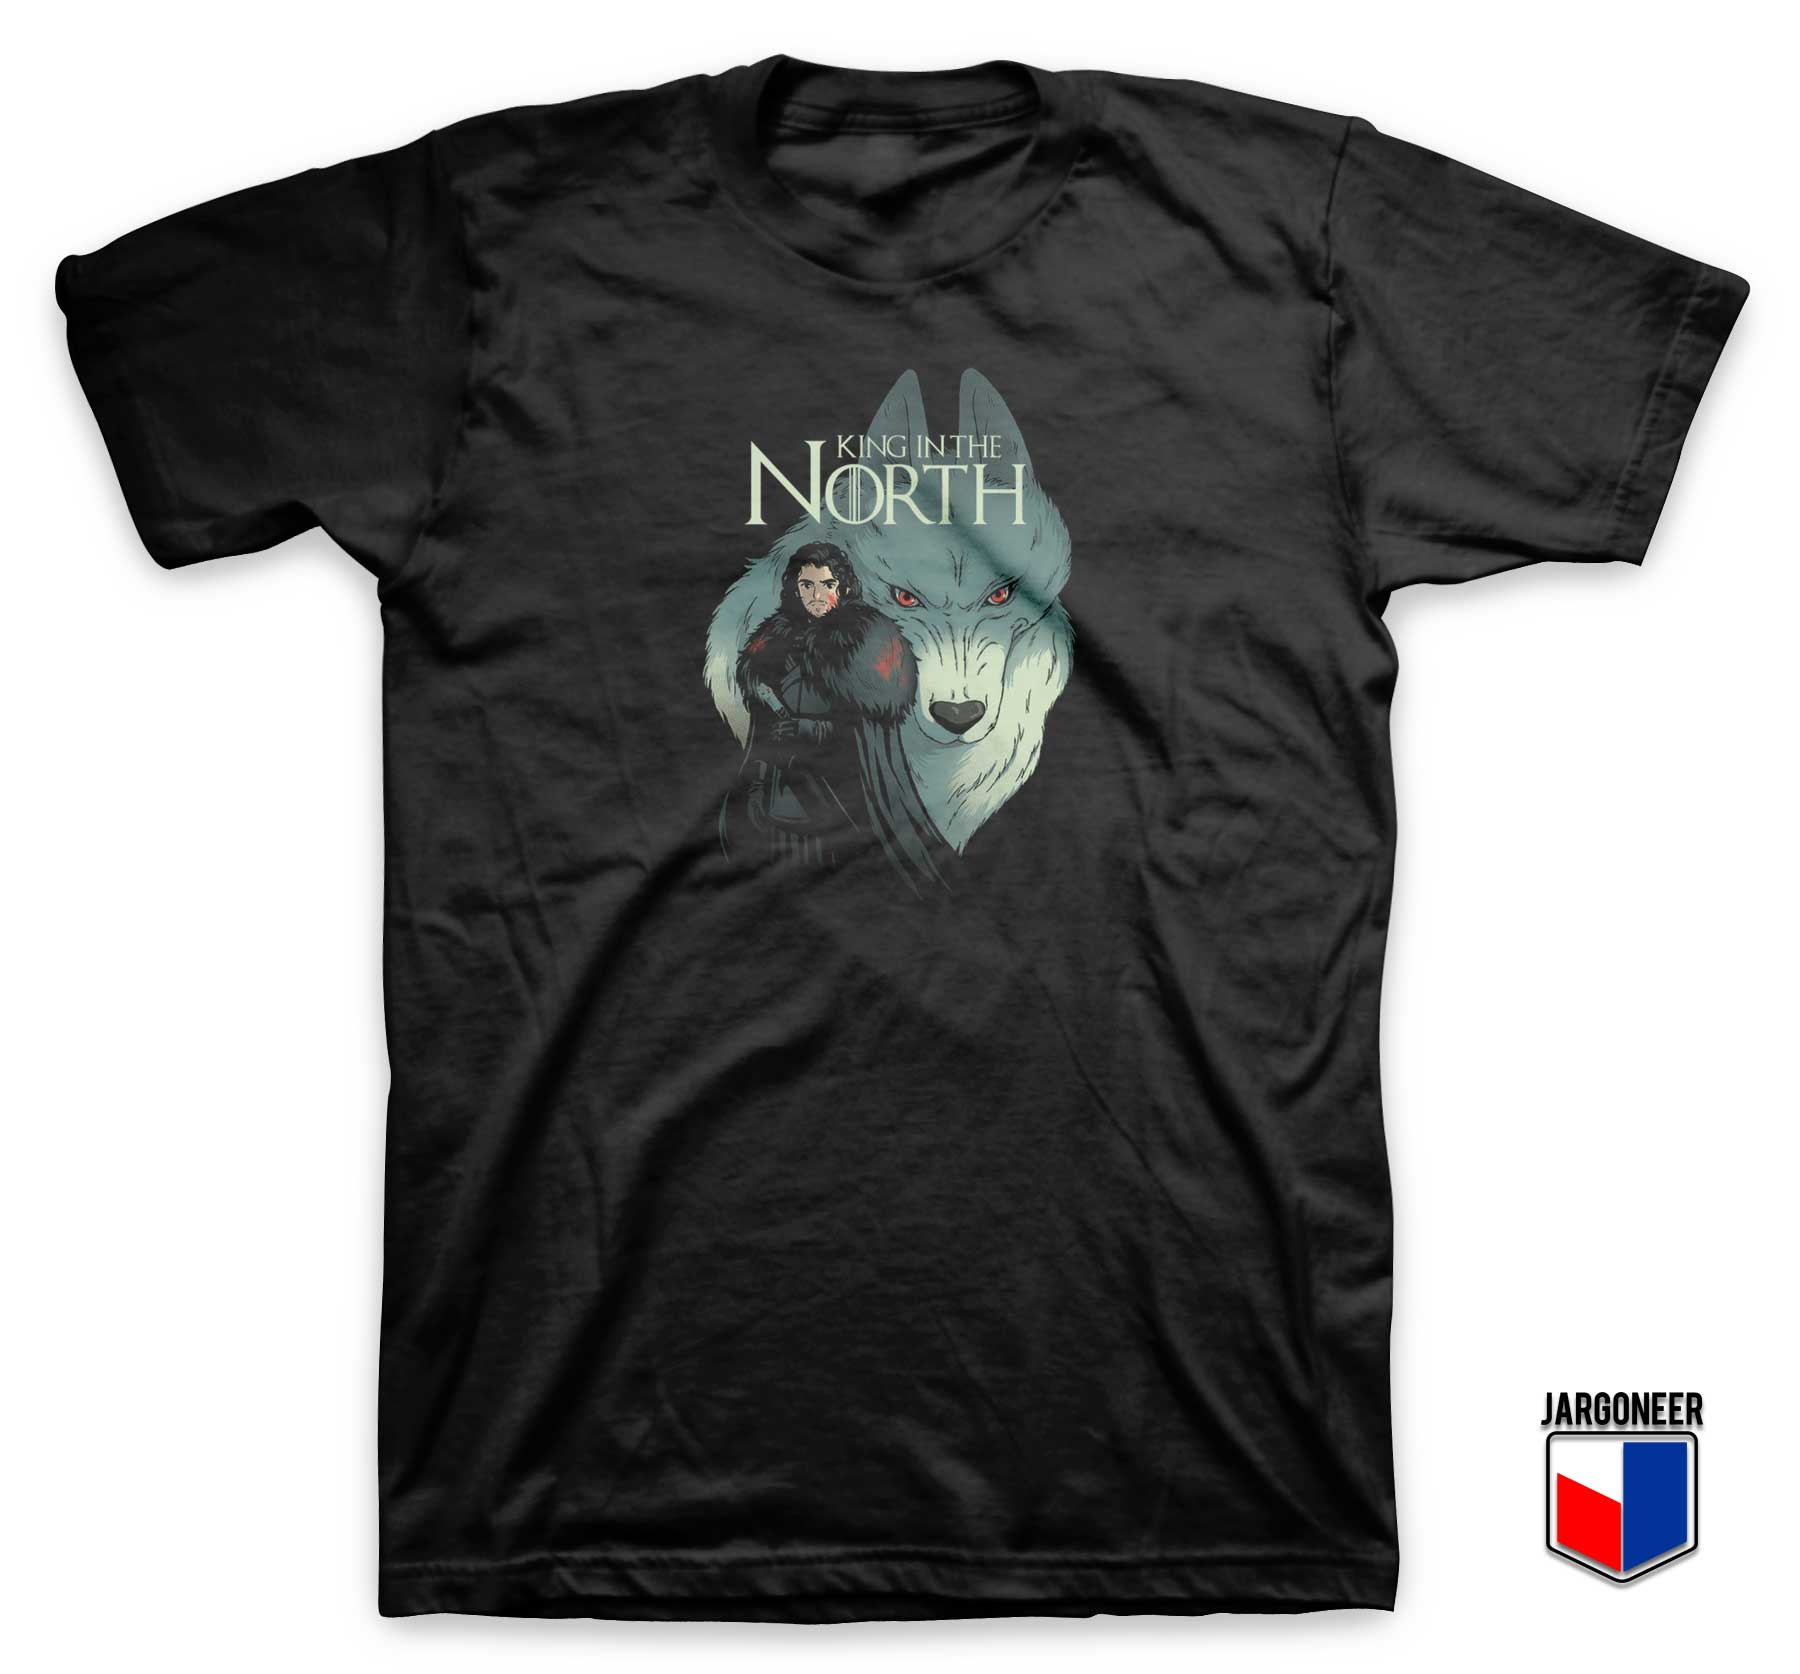 King In The North T Shirt - Shop Unique Graphic Cool Shirt Designs